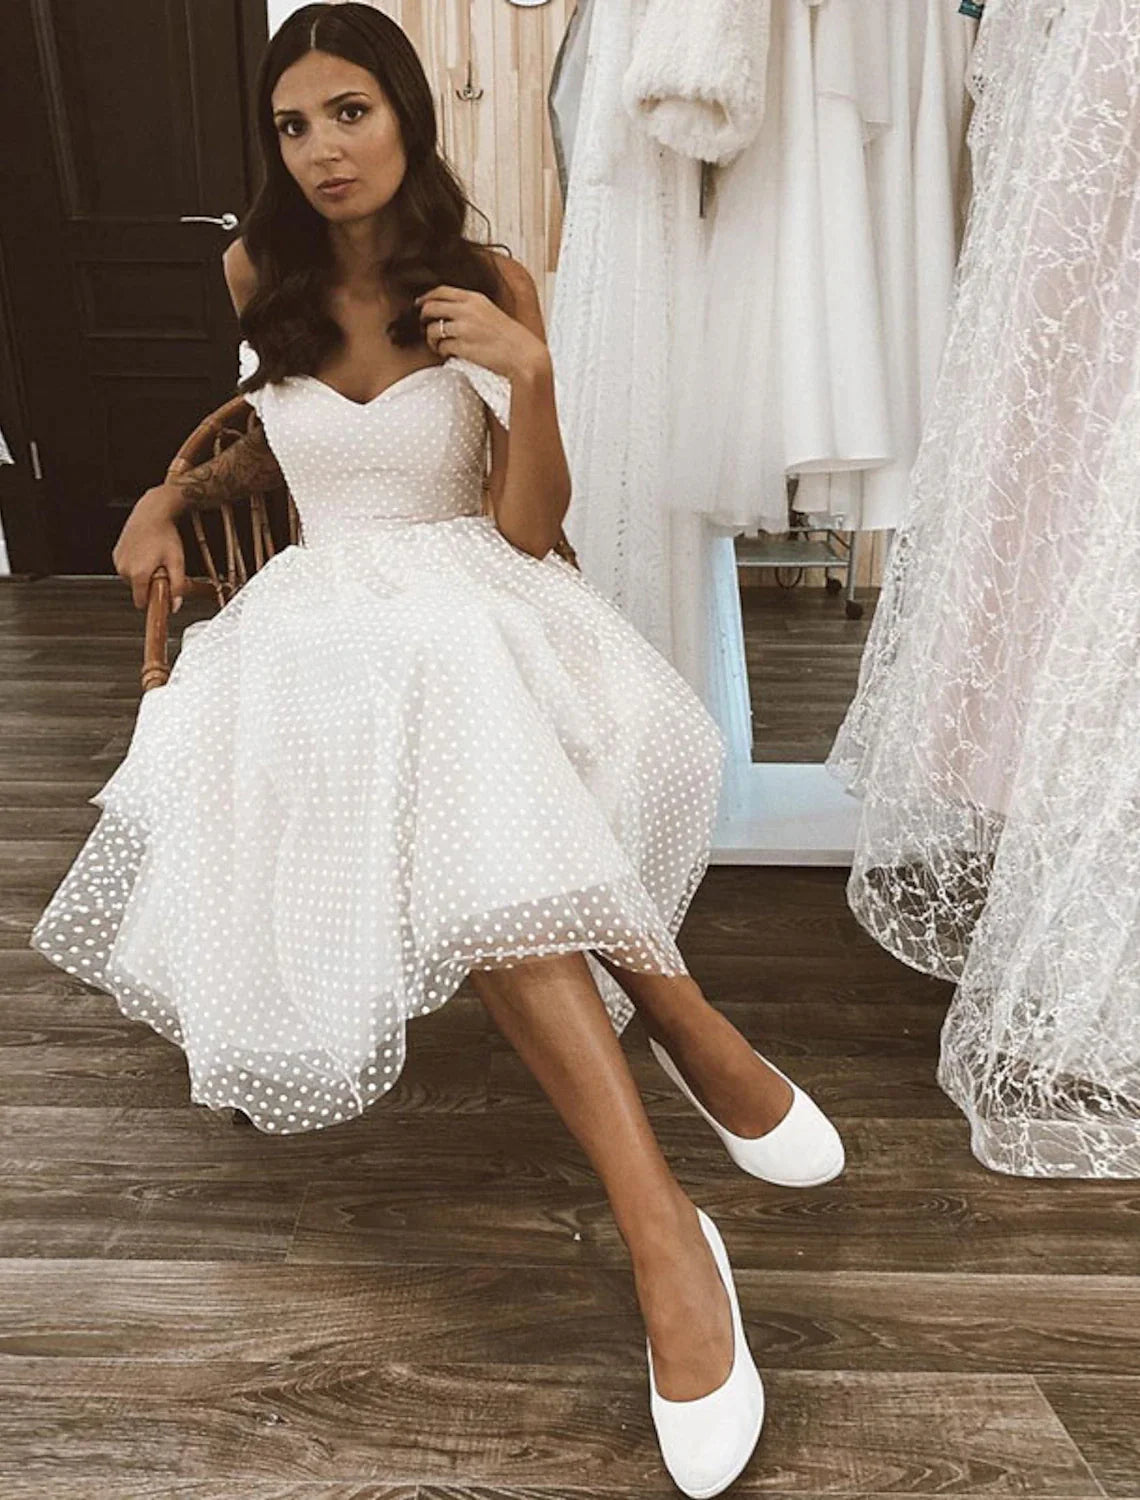 Reception Little White Dresses Wedding Dresses A-Line Off Shoulder Cap Sleeve Knee Length Tulle Bridal Gowns With Solid Color